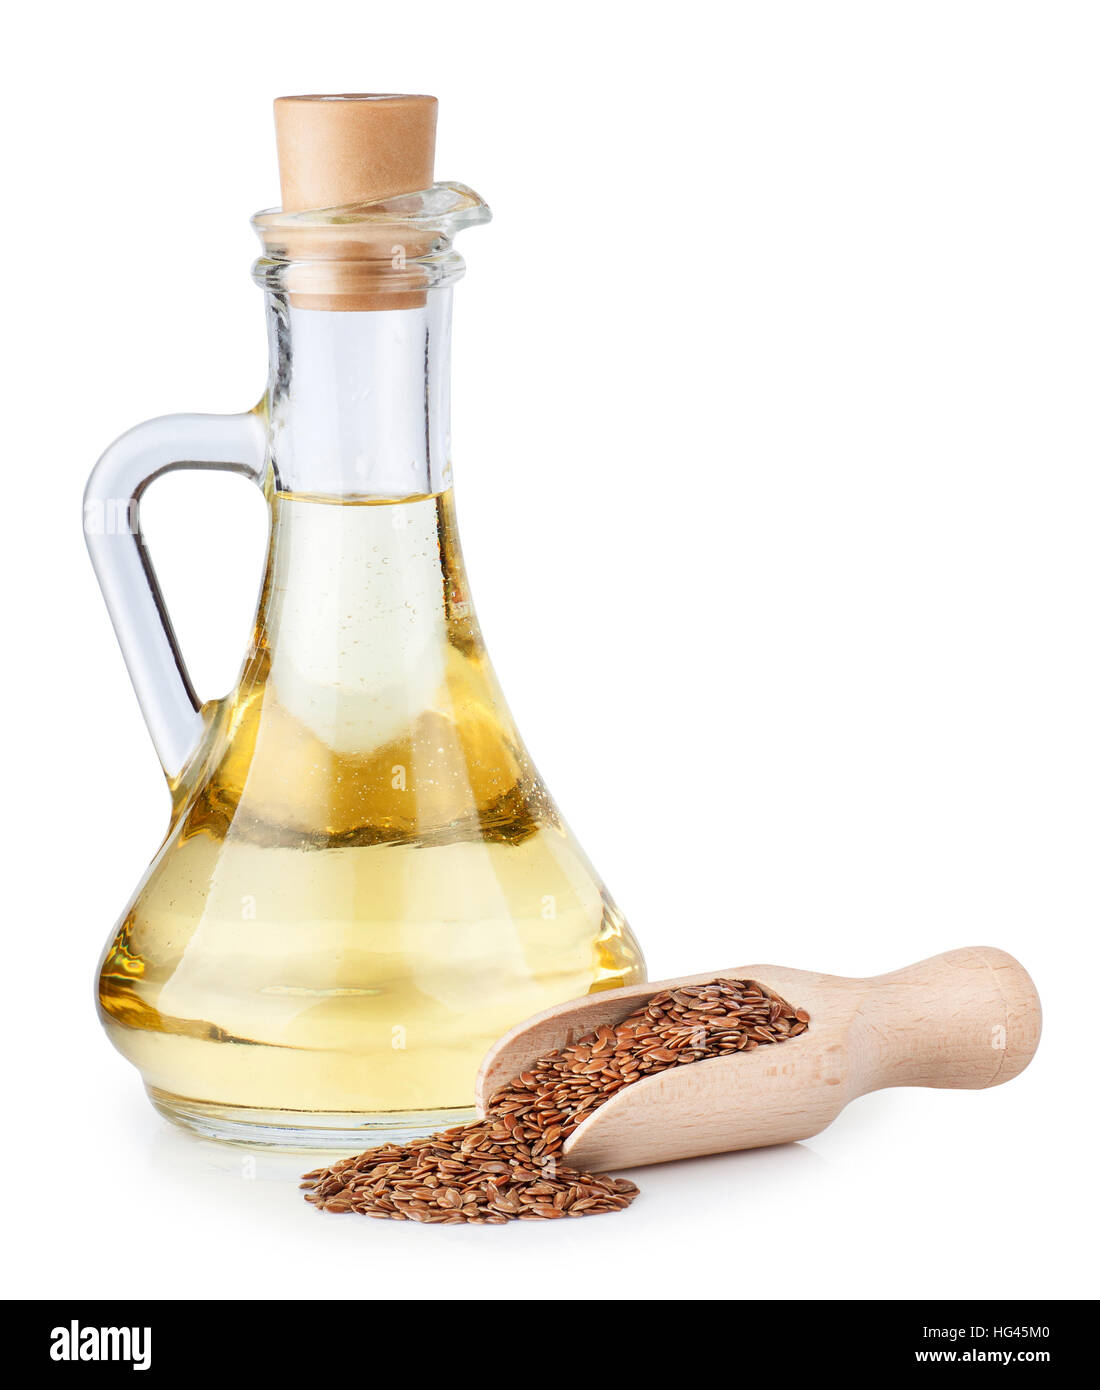 Linseed oil in glass bottle and flax seeds in wooden scoop isolated on white background Stock Photo